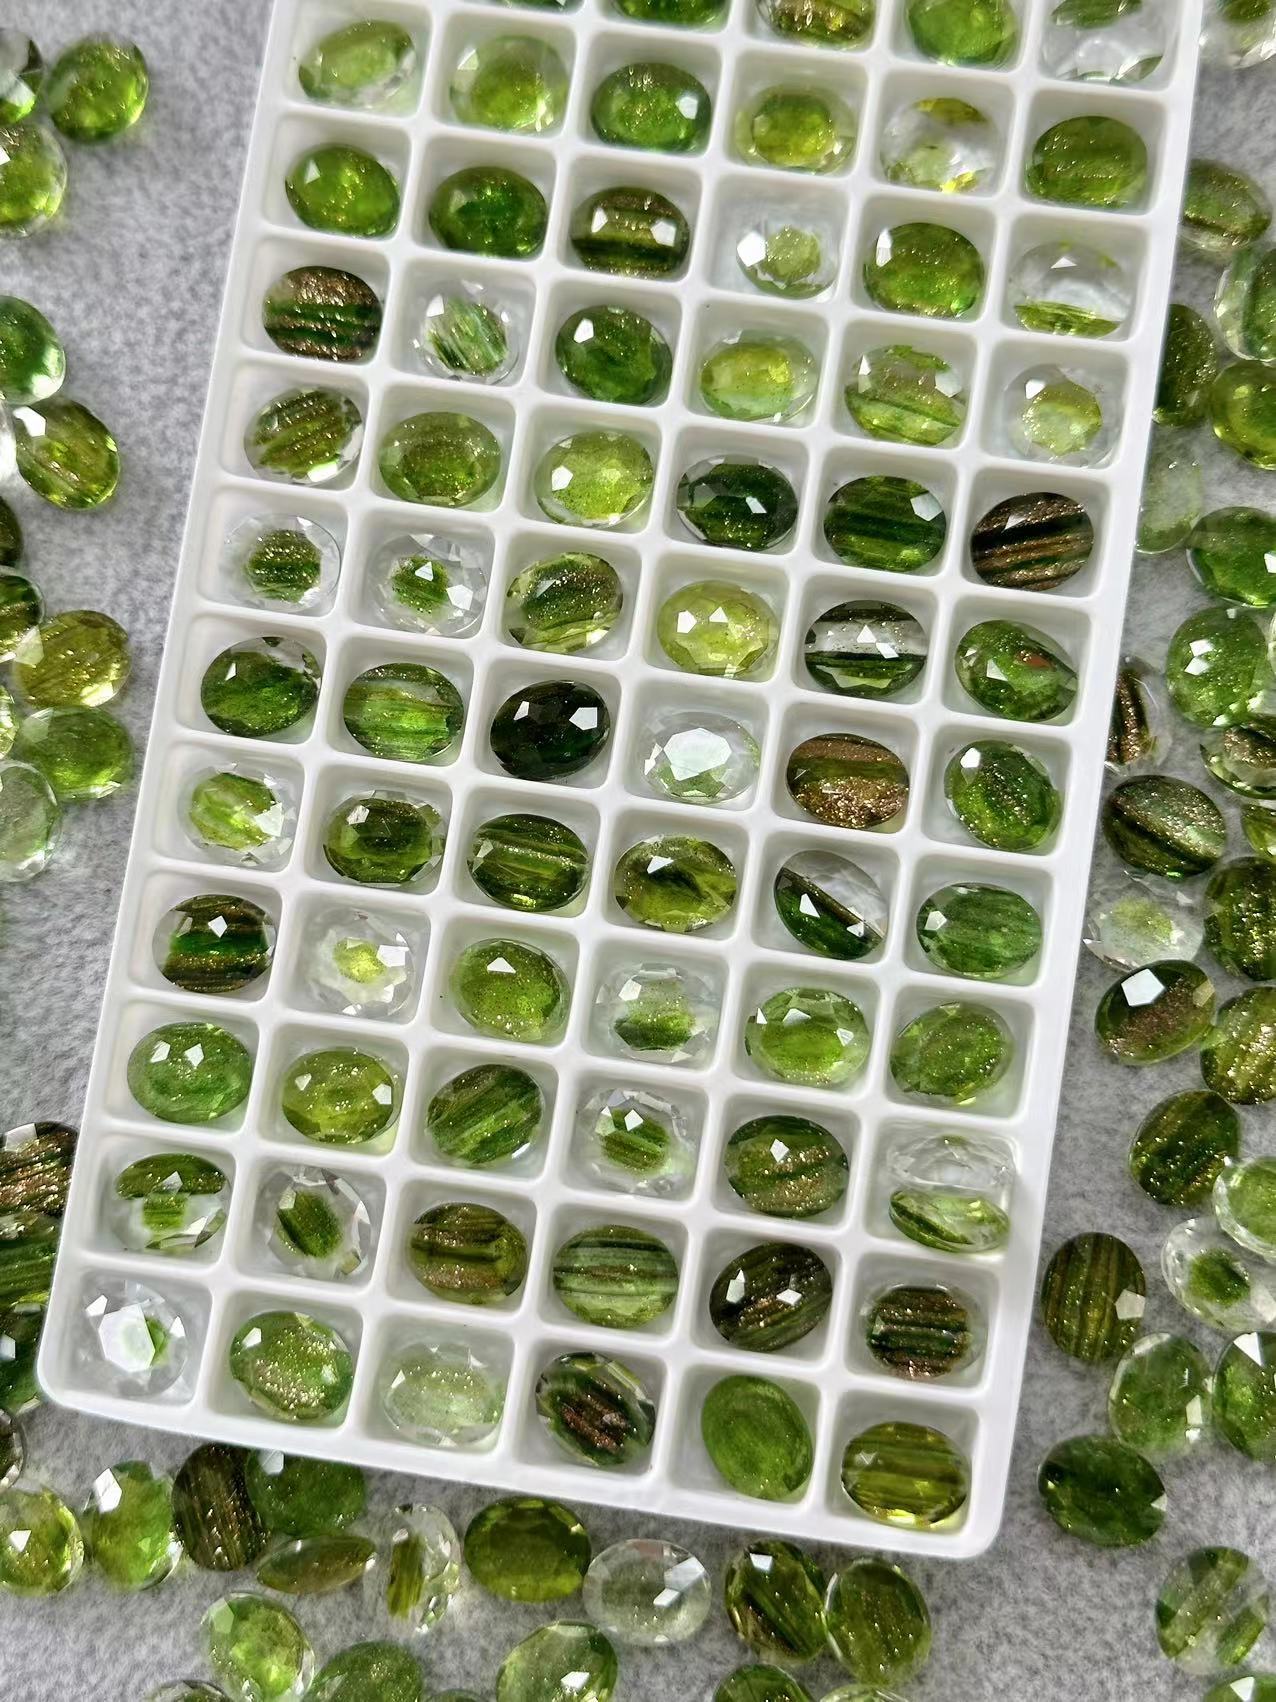 Jinsha Green Series K9 High-Quality Manicure Jewelry Fat Square Rock Sugar round Tip Nail Beauty Rhinestone Ornaments Accessories Factory Wholesale